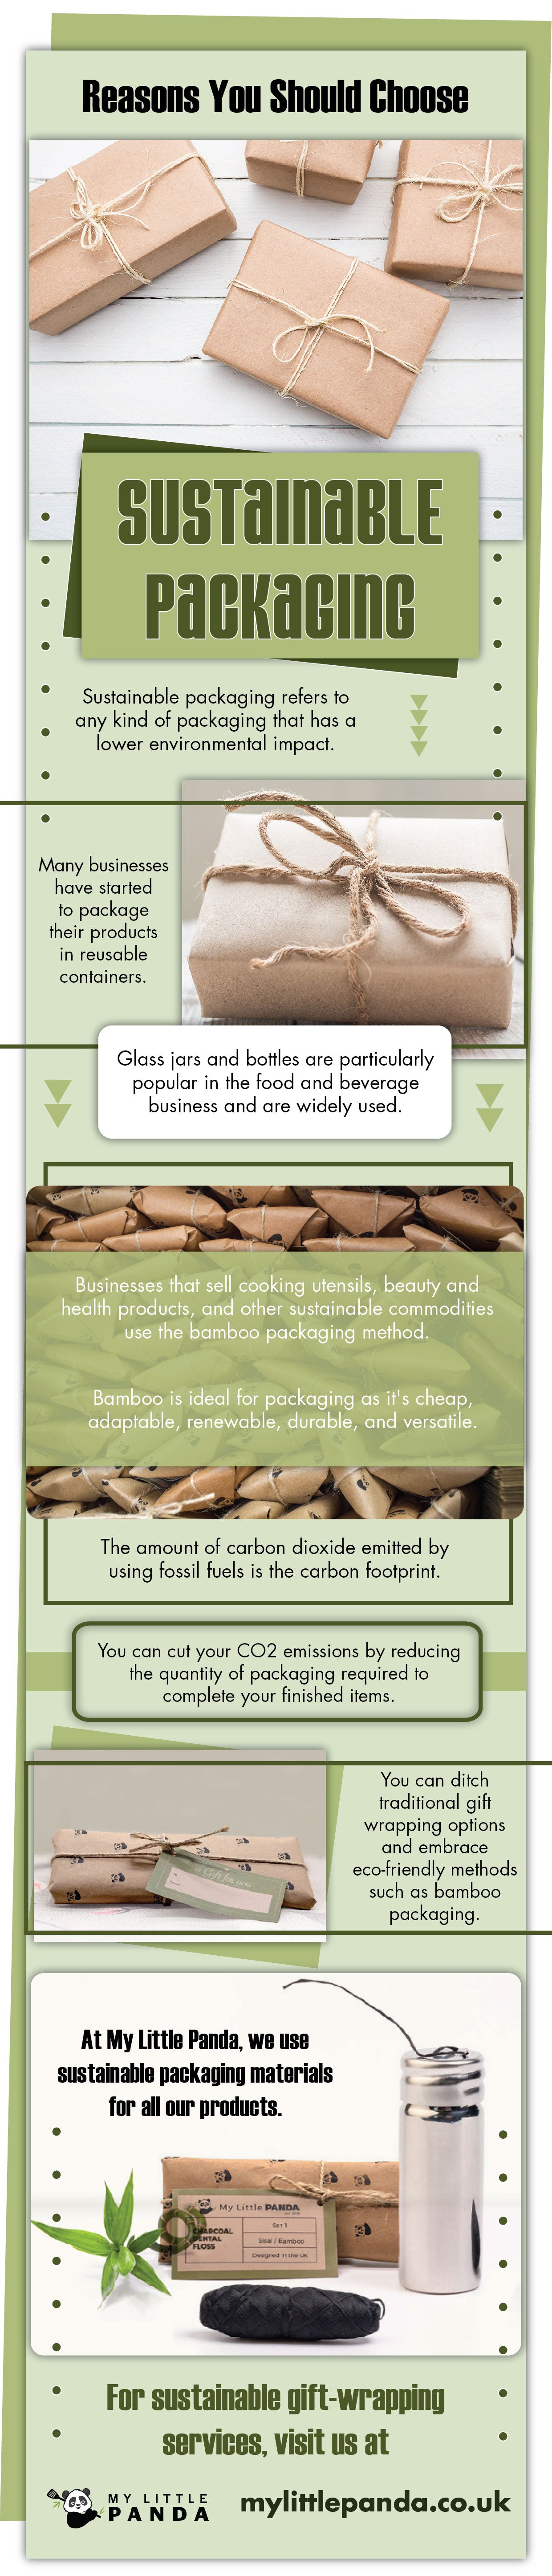 Reasons You Should Choose Sustainable Packaging - Infograph